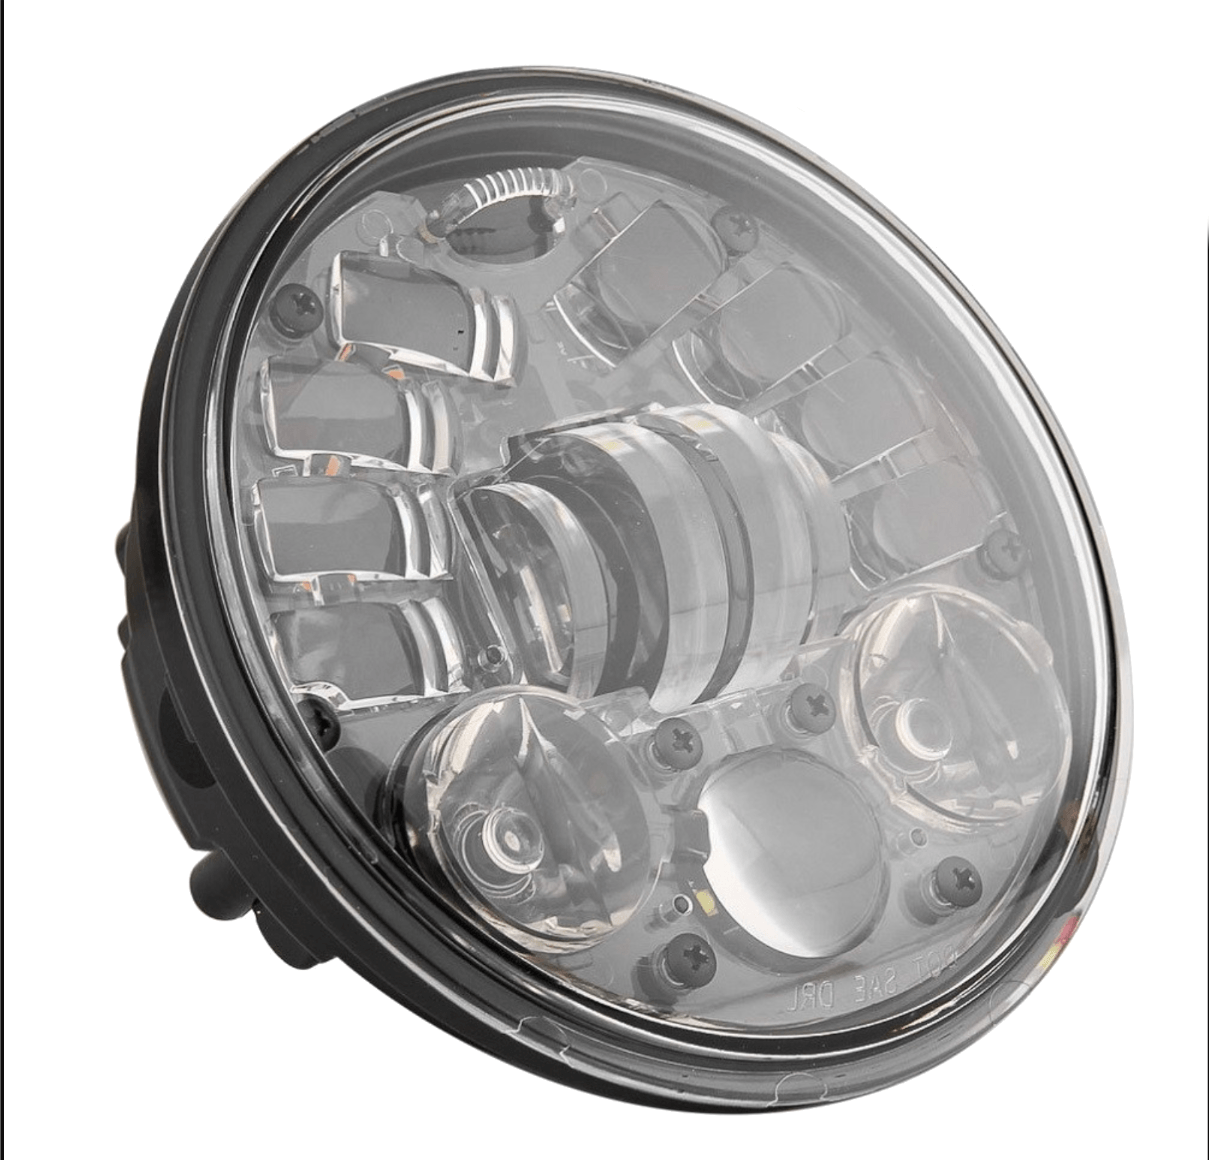 Eagle Lights 5 3/4" LED Projector Headlight with Integrated Turn Signals for Harley Davidson 5.75'' LED Projection Head Lamp